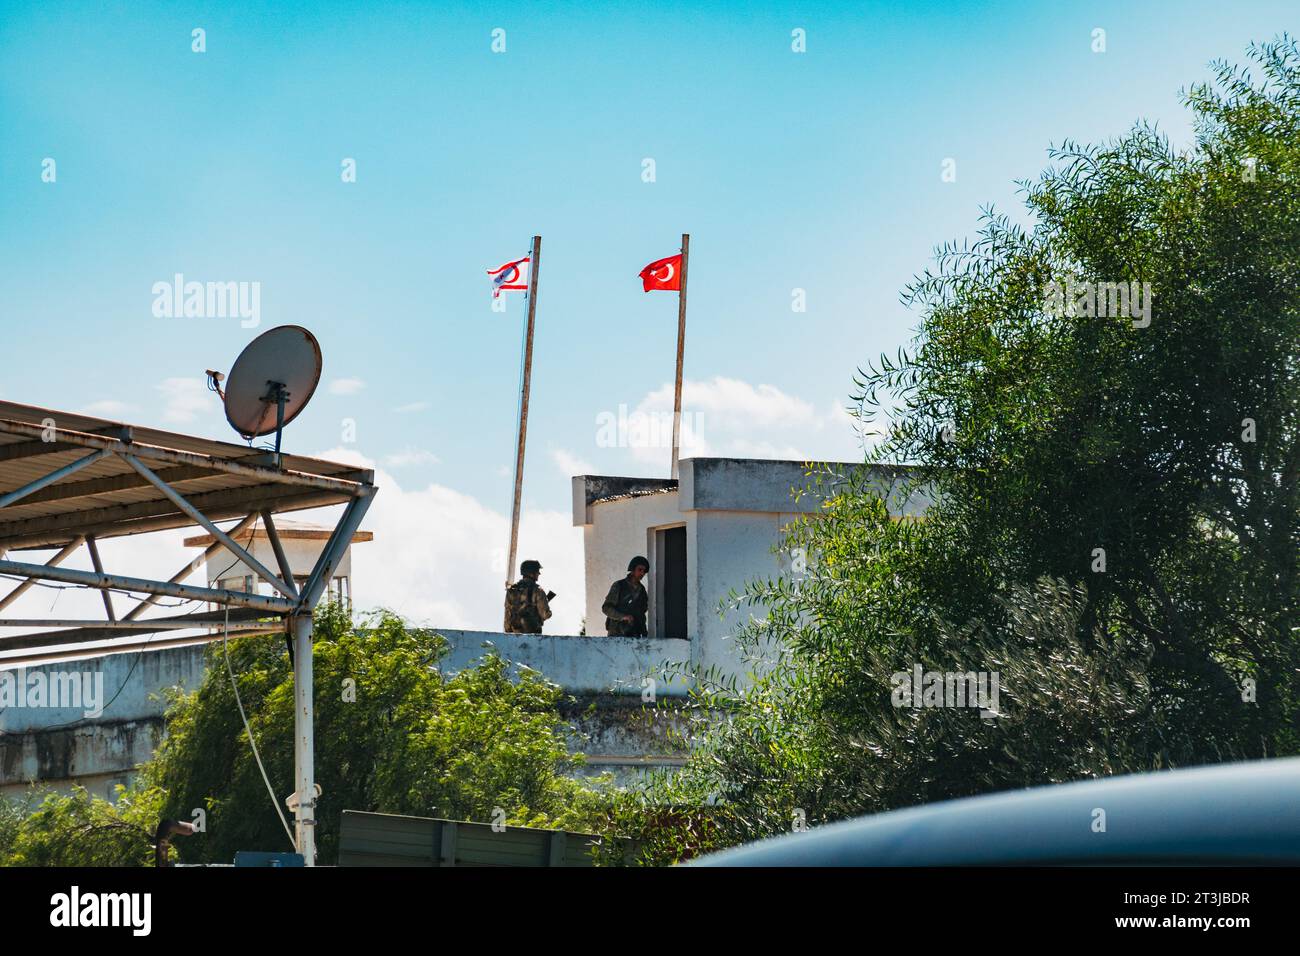 soldiers man a watchtower with Turkish and Northern Cypriot flags flying at a border crossing in North Nicosia, Cyprus Stock Photo